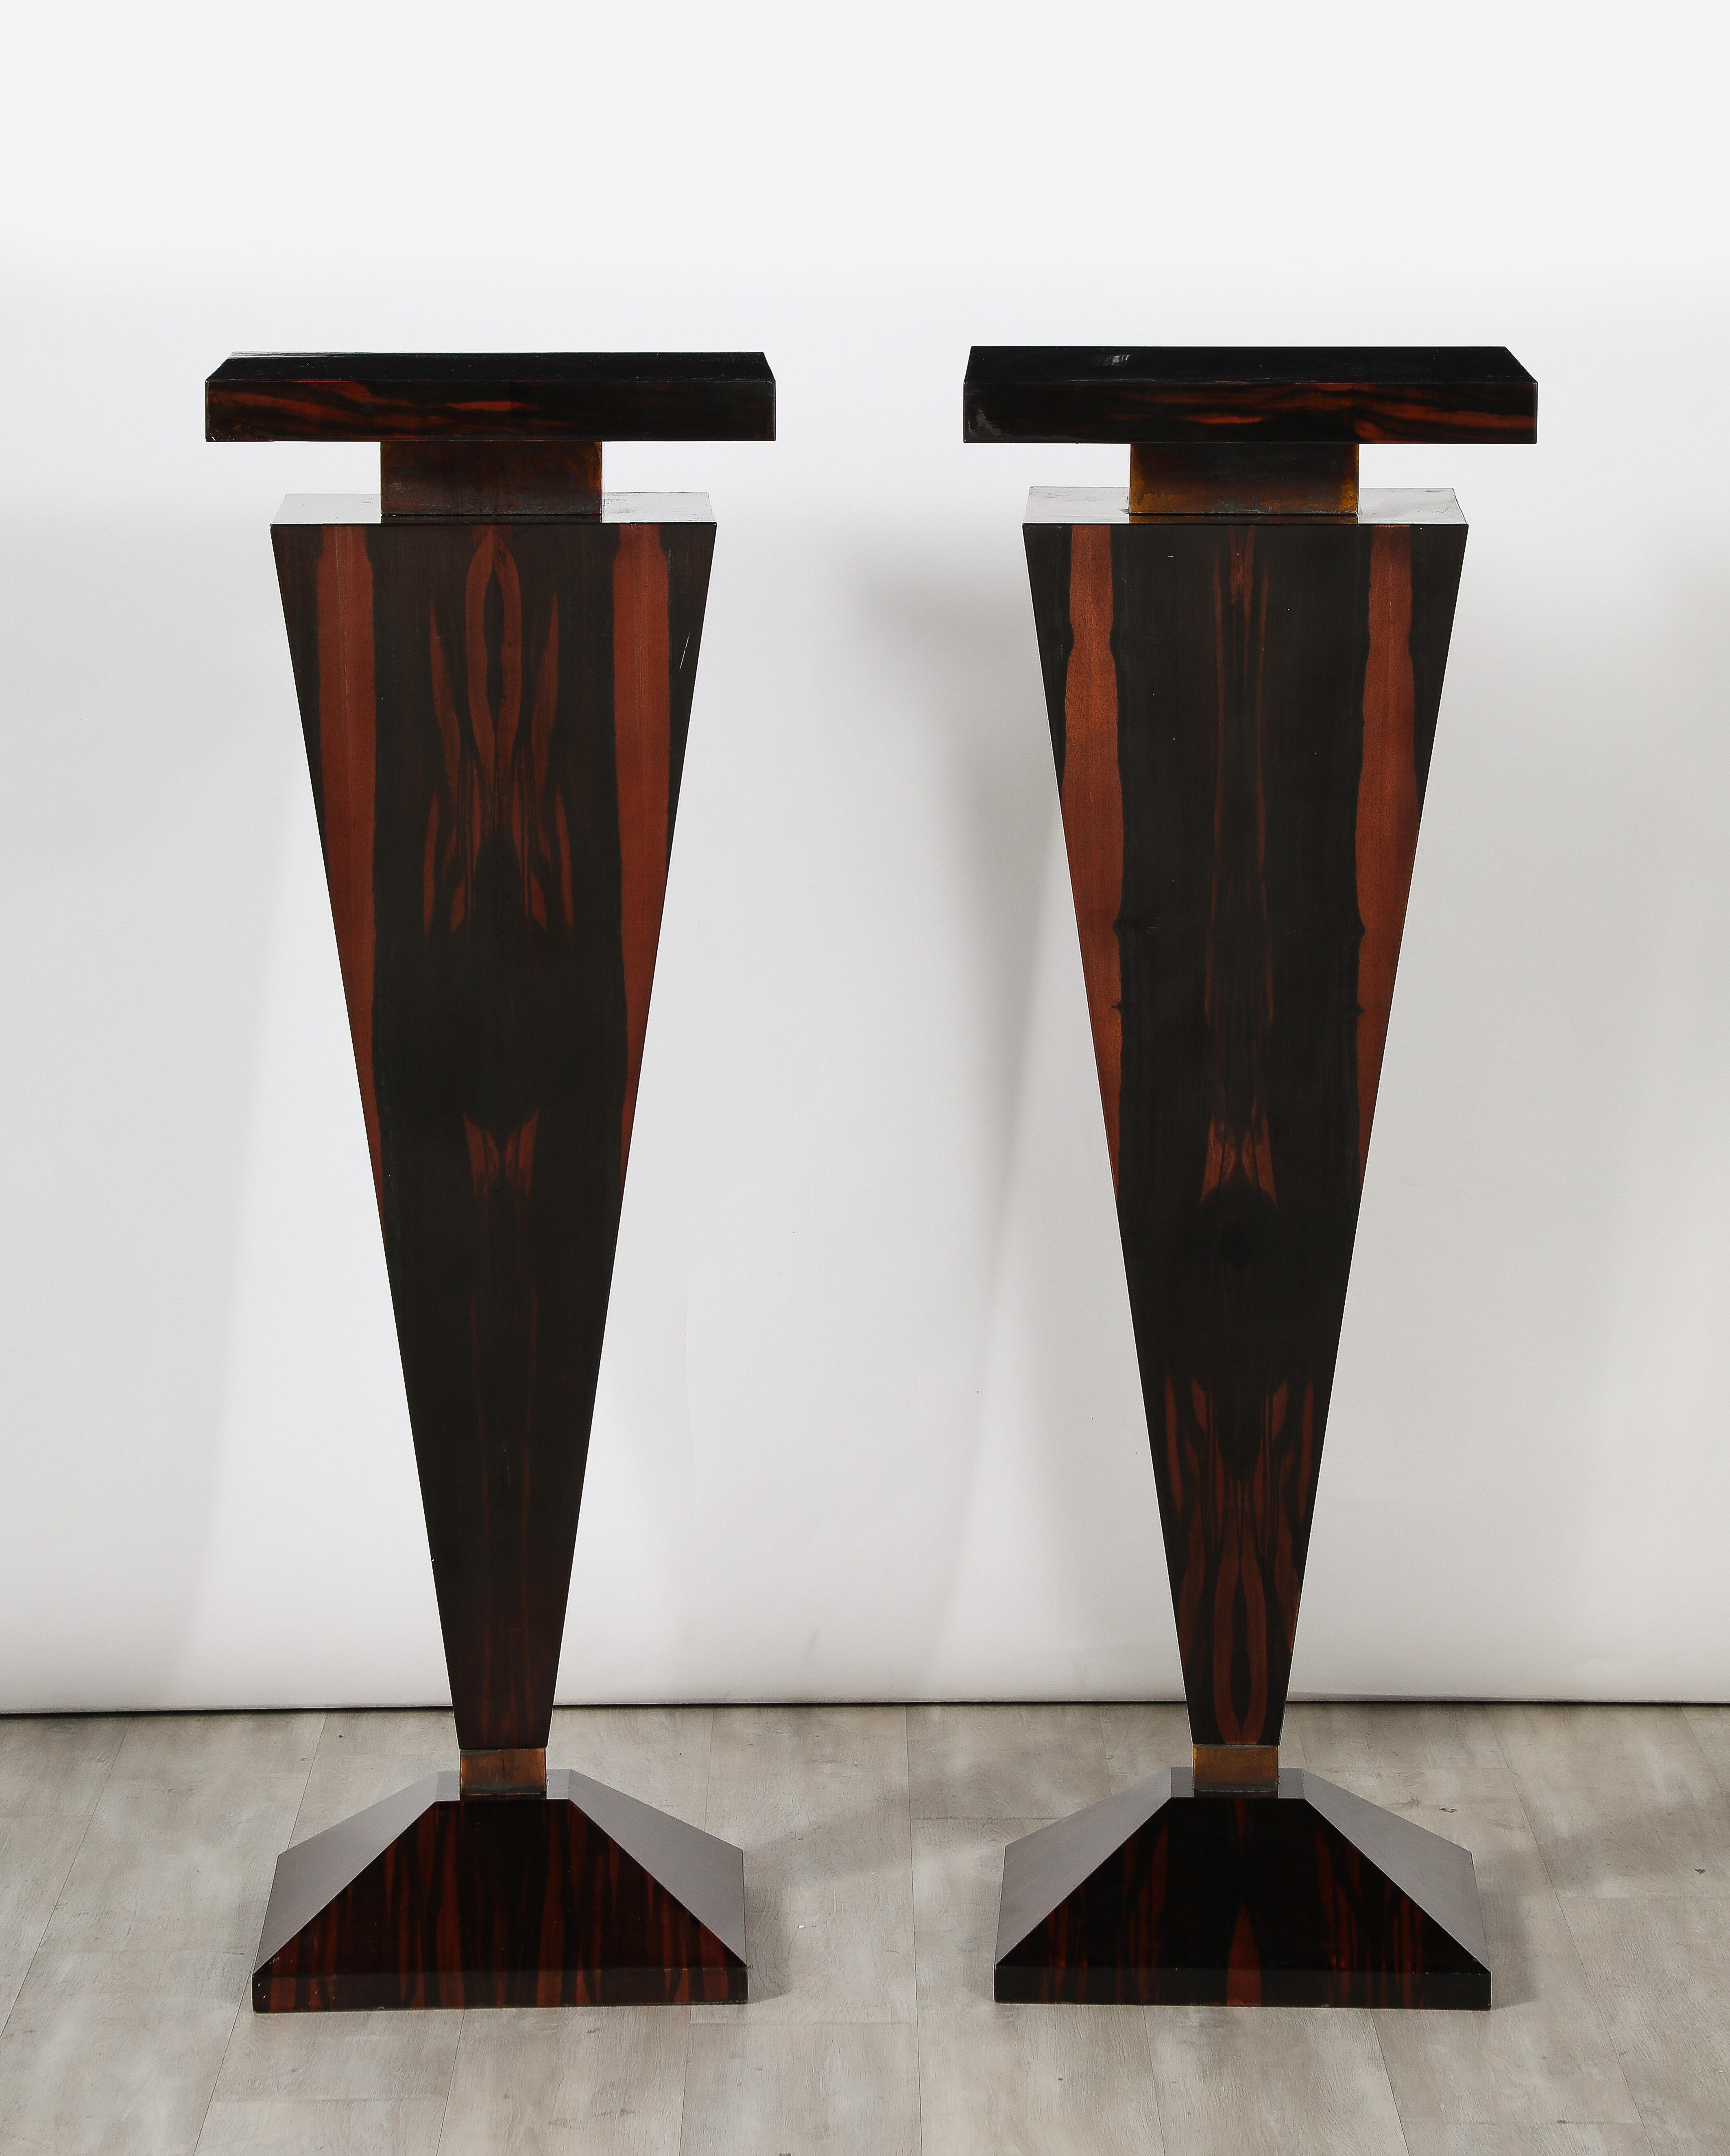 A dramatic grand scale pair of pedestals in Macassar ebony veneer with a high gloss finish, the tops and base with banding of gilt metal. These were commissioned for a private home in Northern Italy, circa 1970's.  They stand alone as stunning